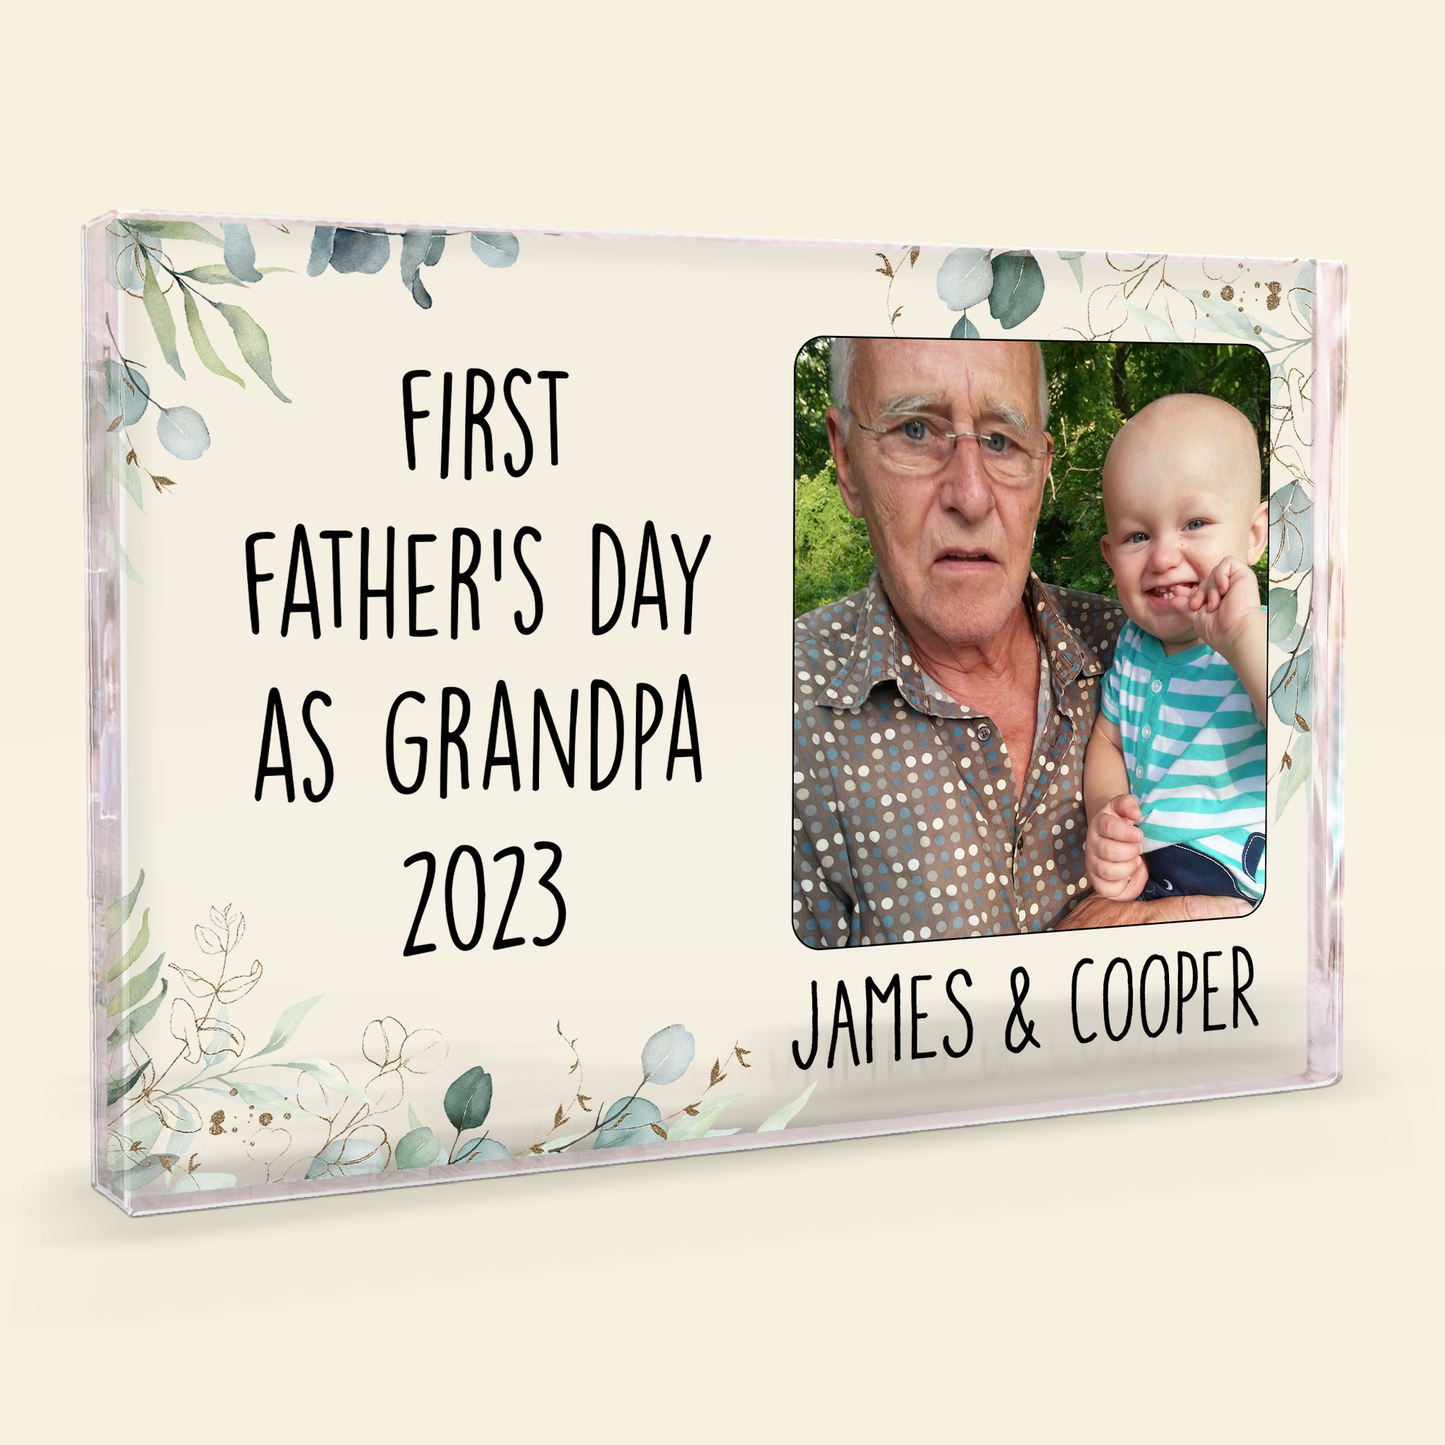 First Father's Day As Grandpa - Personalized Rectangle Acrylic Plaque